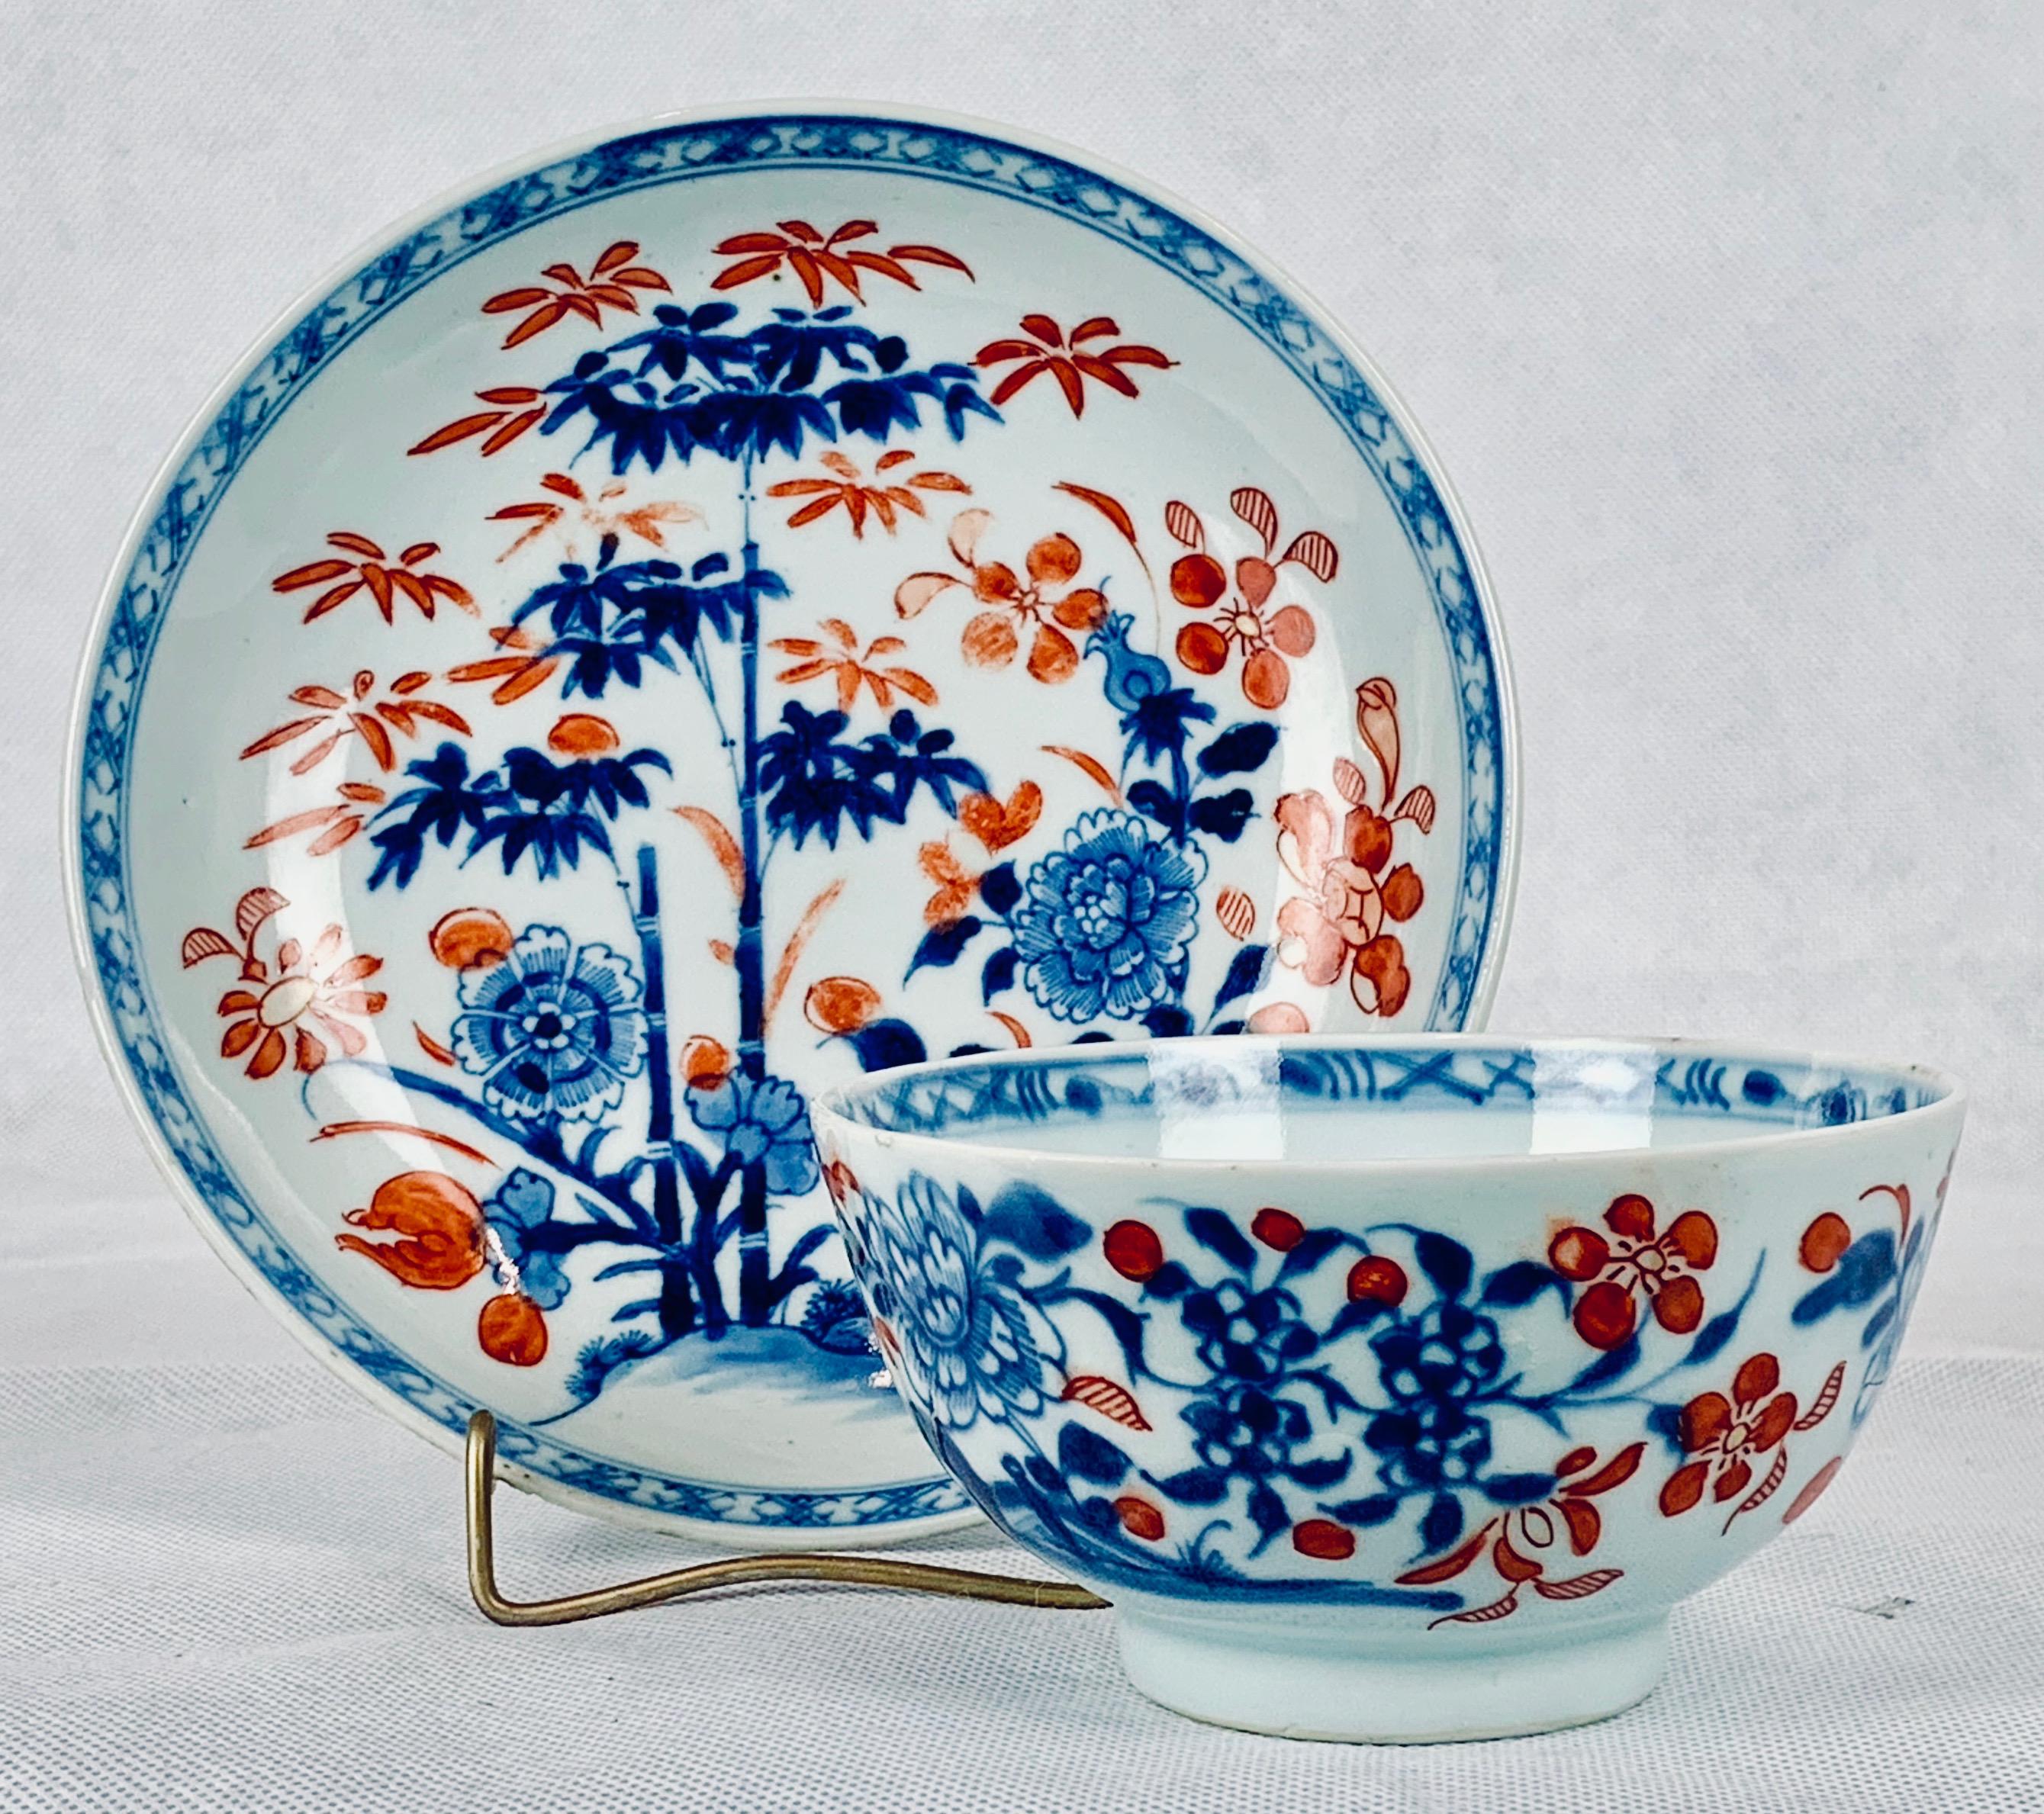 Chinese Export Export Porcelain Handless Tea Bowl and Saucer in the Chinese Imari Pattern